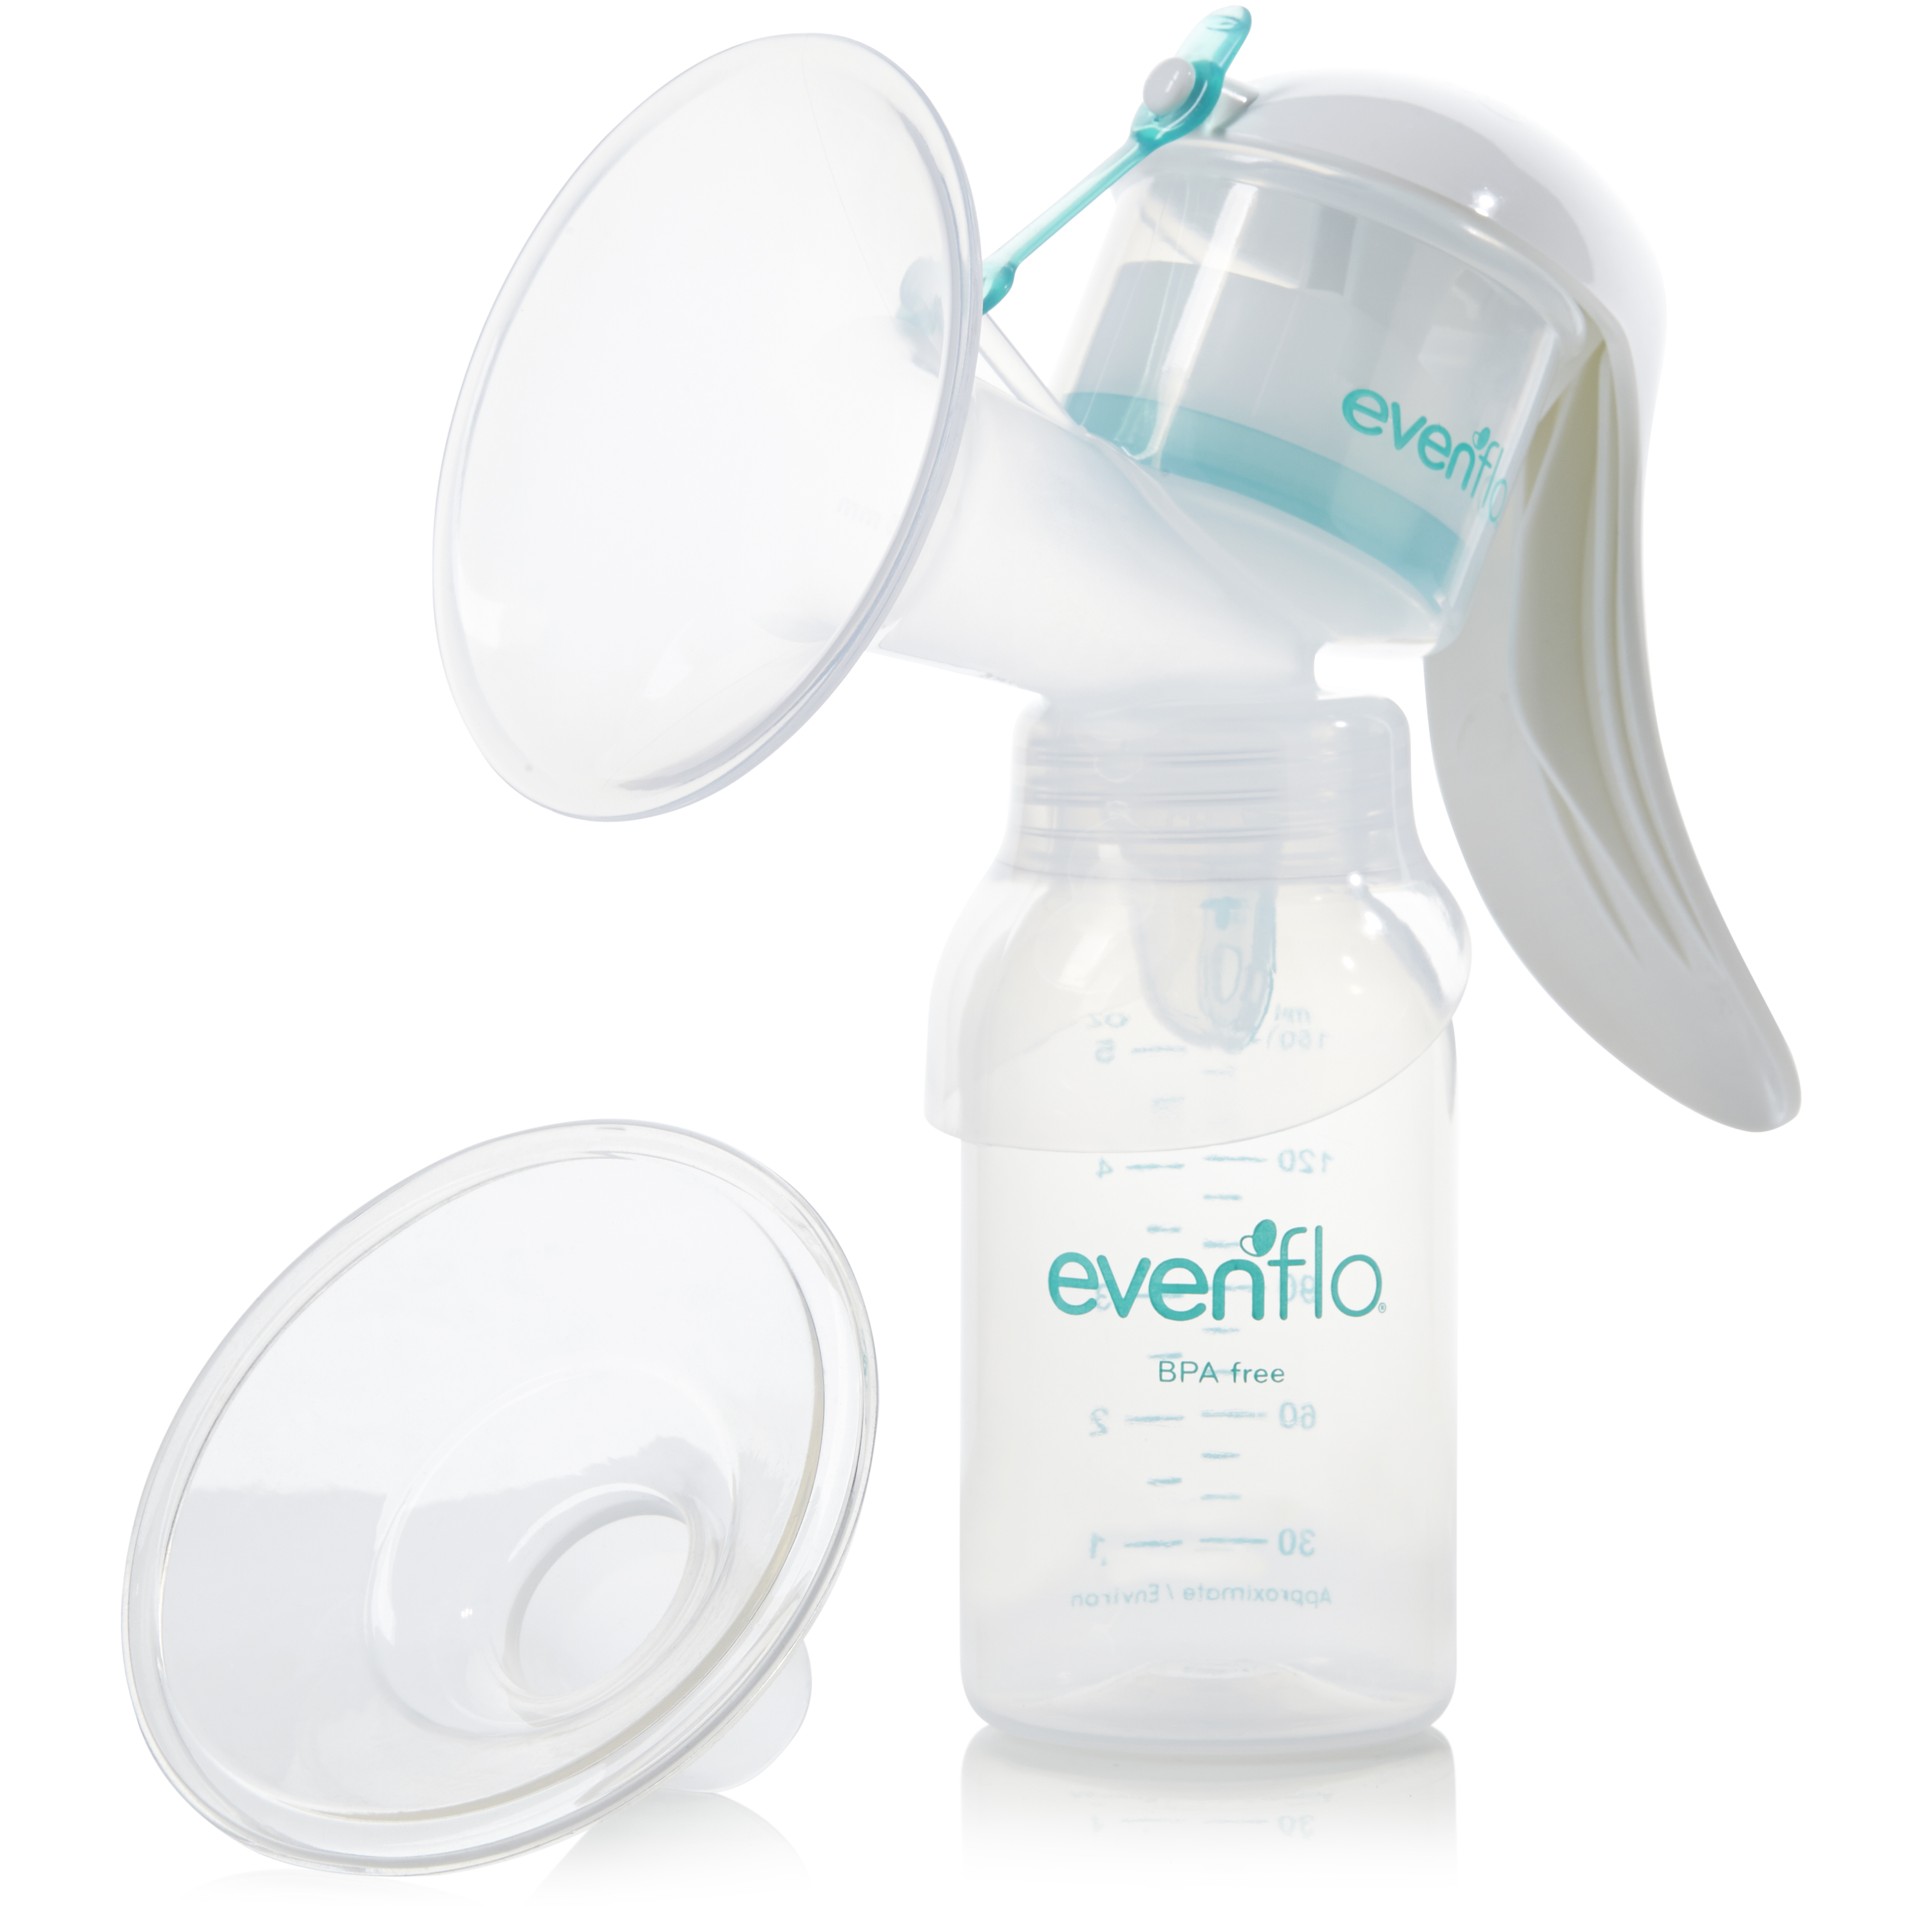 Even Flo Best For Baby 5212511 Manual Breast Pump - image 1 of 4